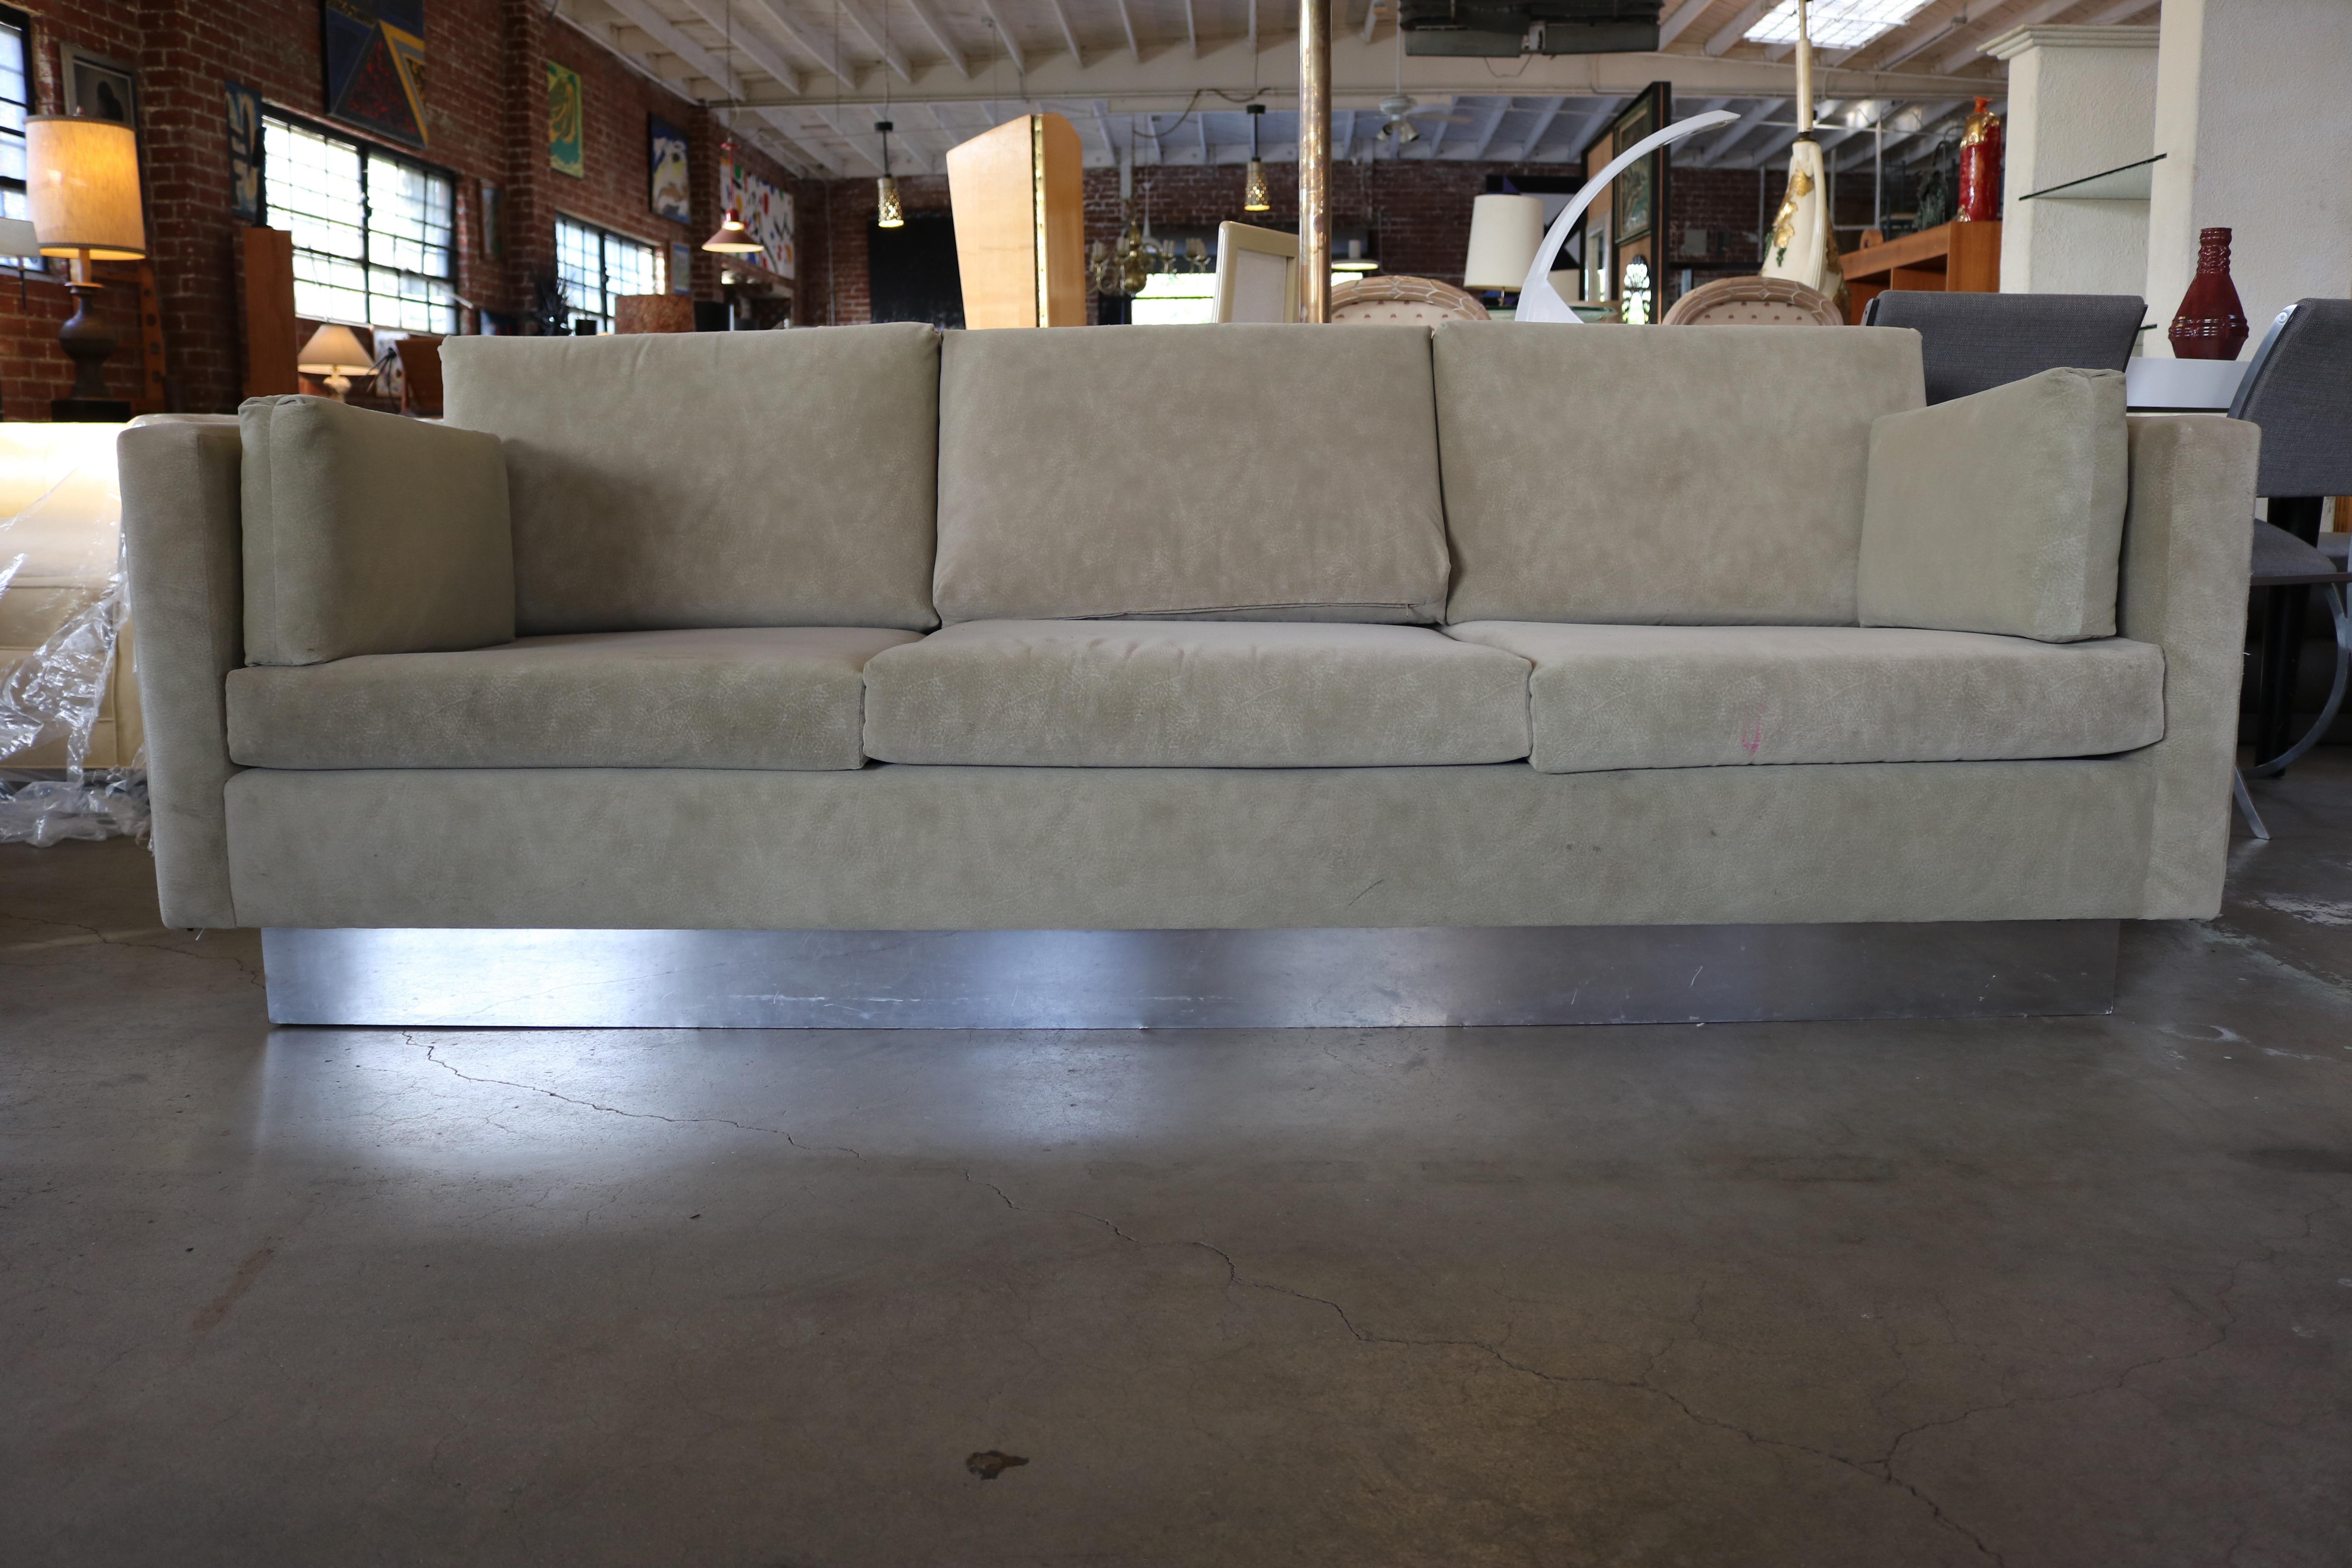 This textured suede light brown three-seat sofa rests on a chrome base, with two side cushions.